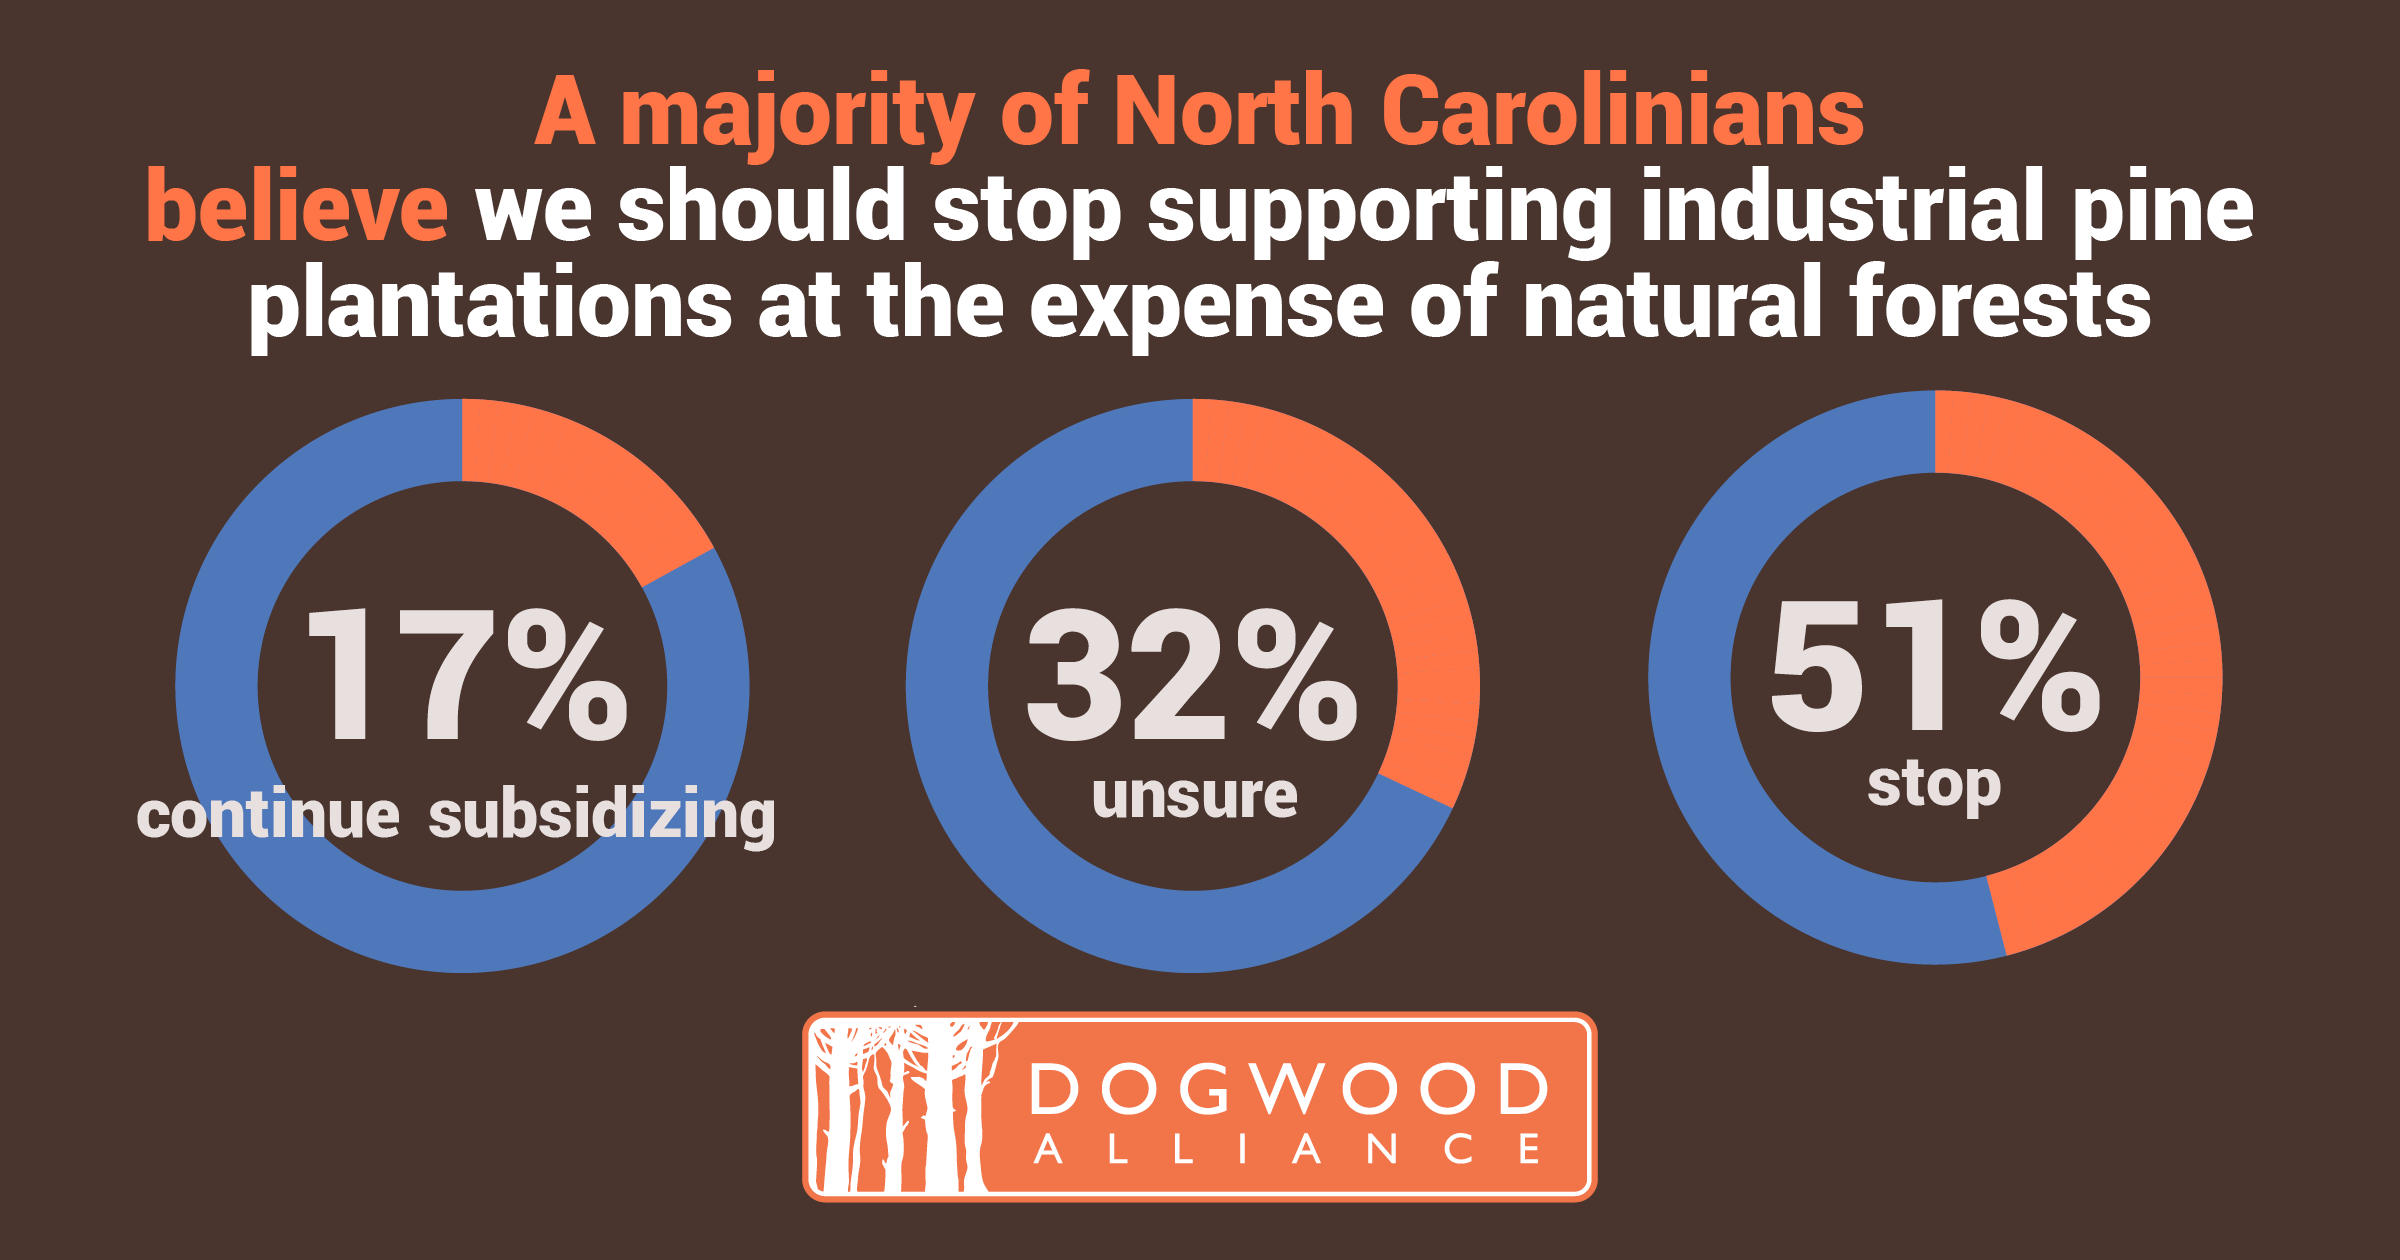 A majority of NC residents believe we should stop supporting industry expansion into natural forests.